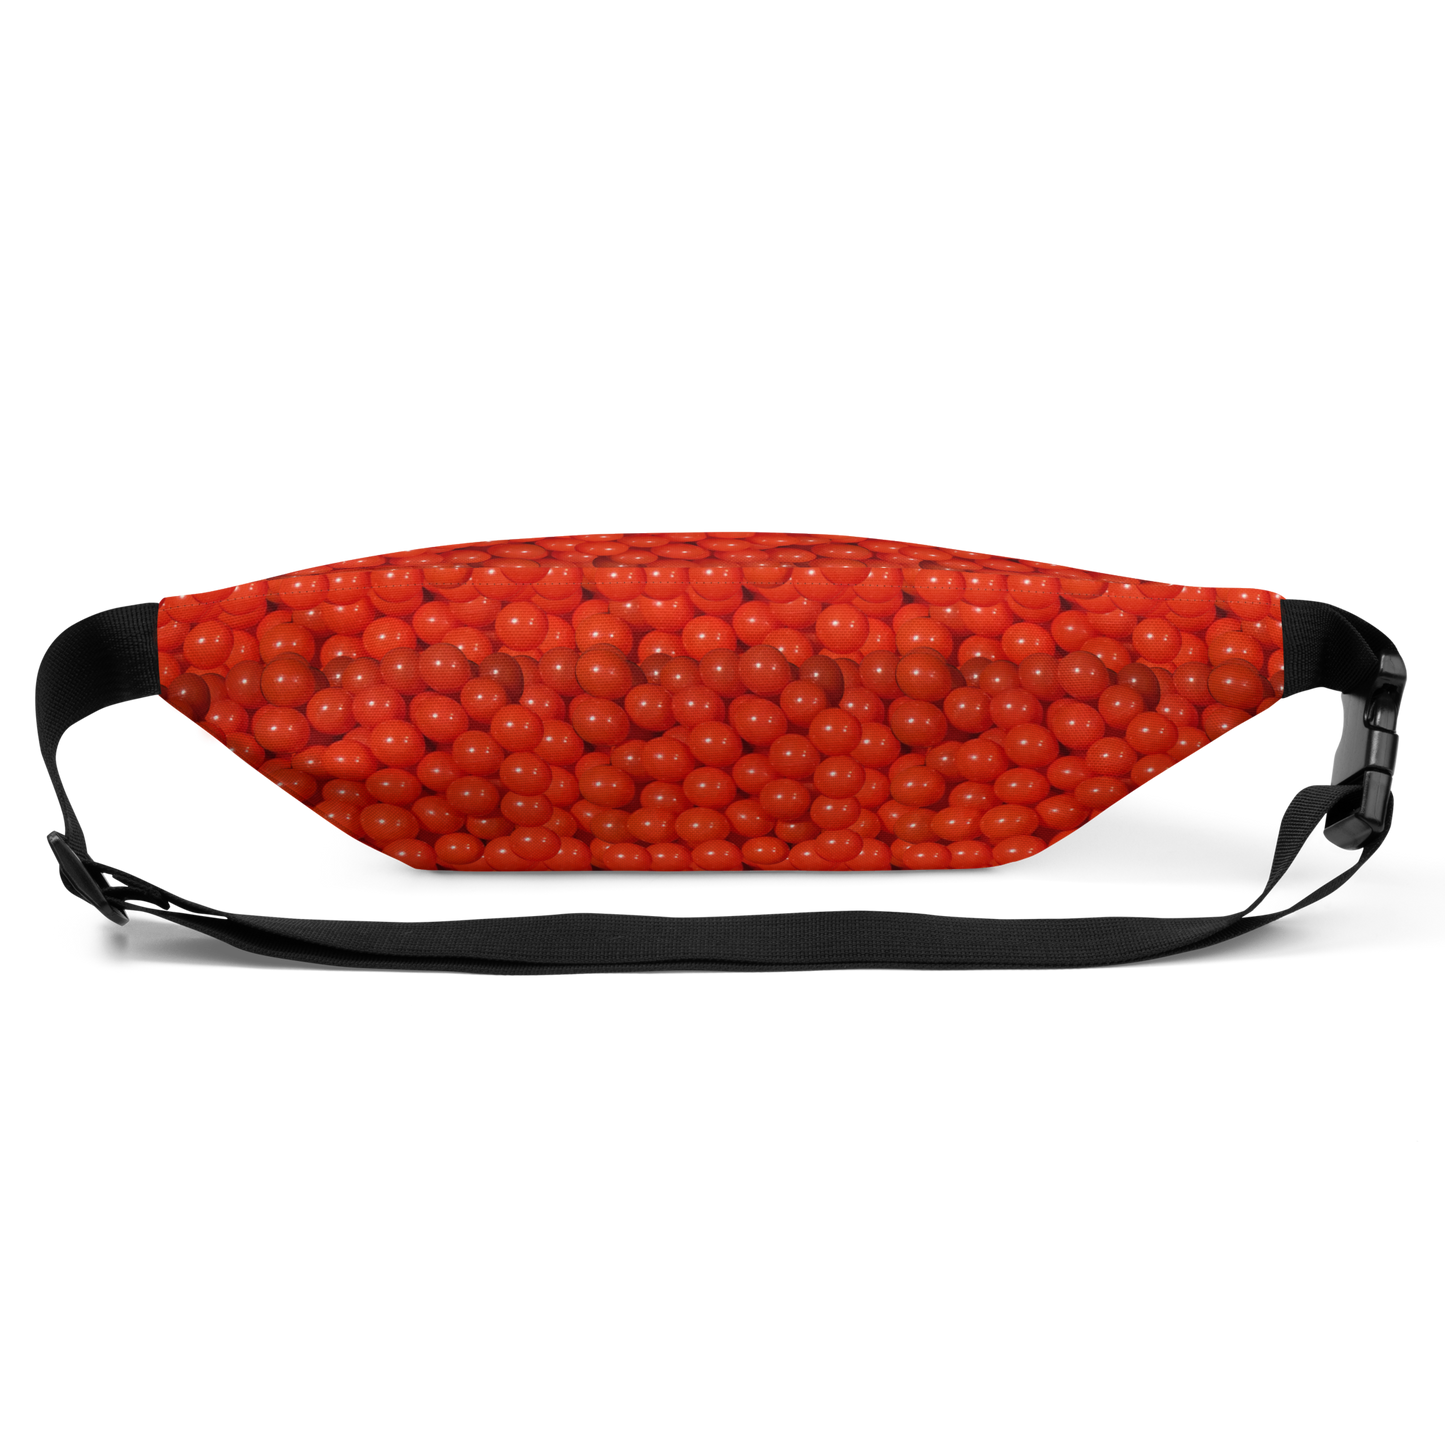 Ball Pit in Red Fanny Pack